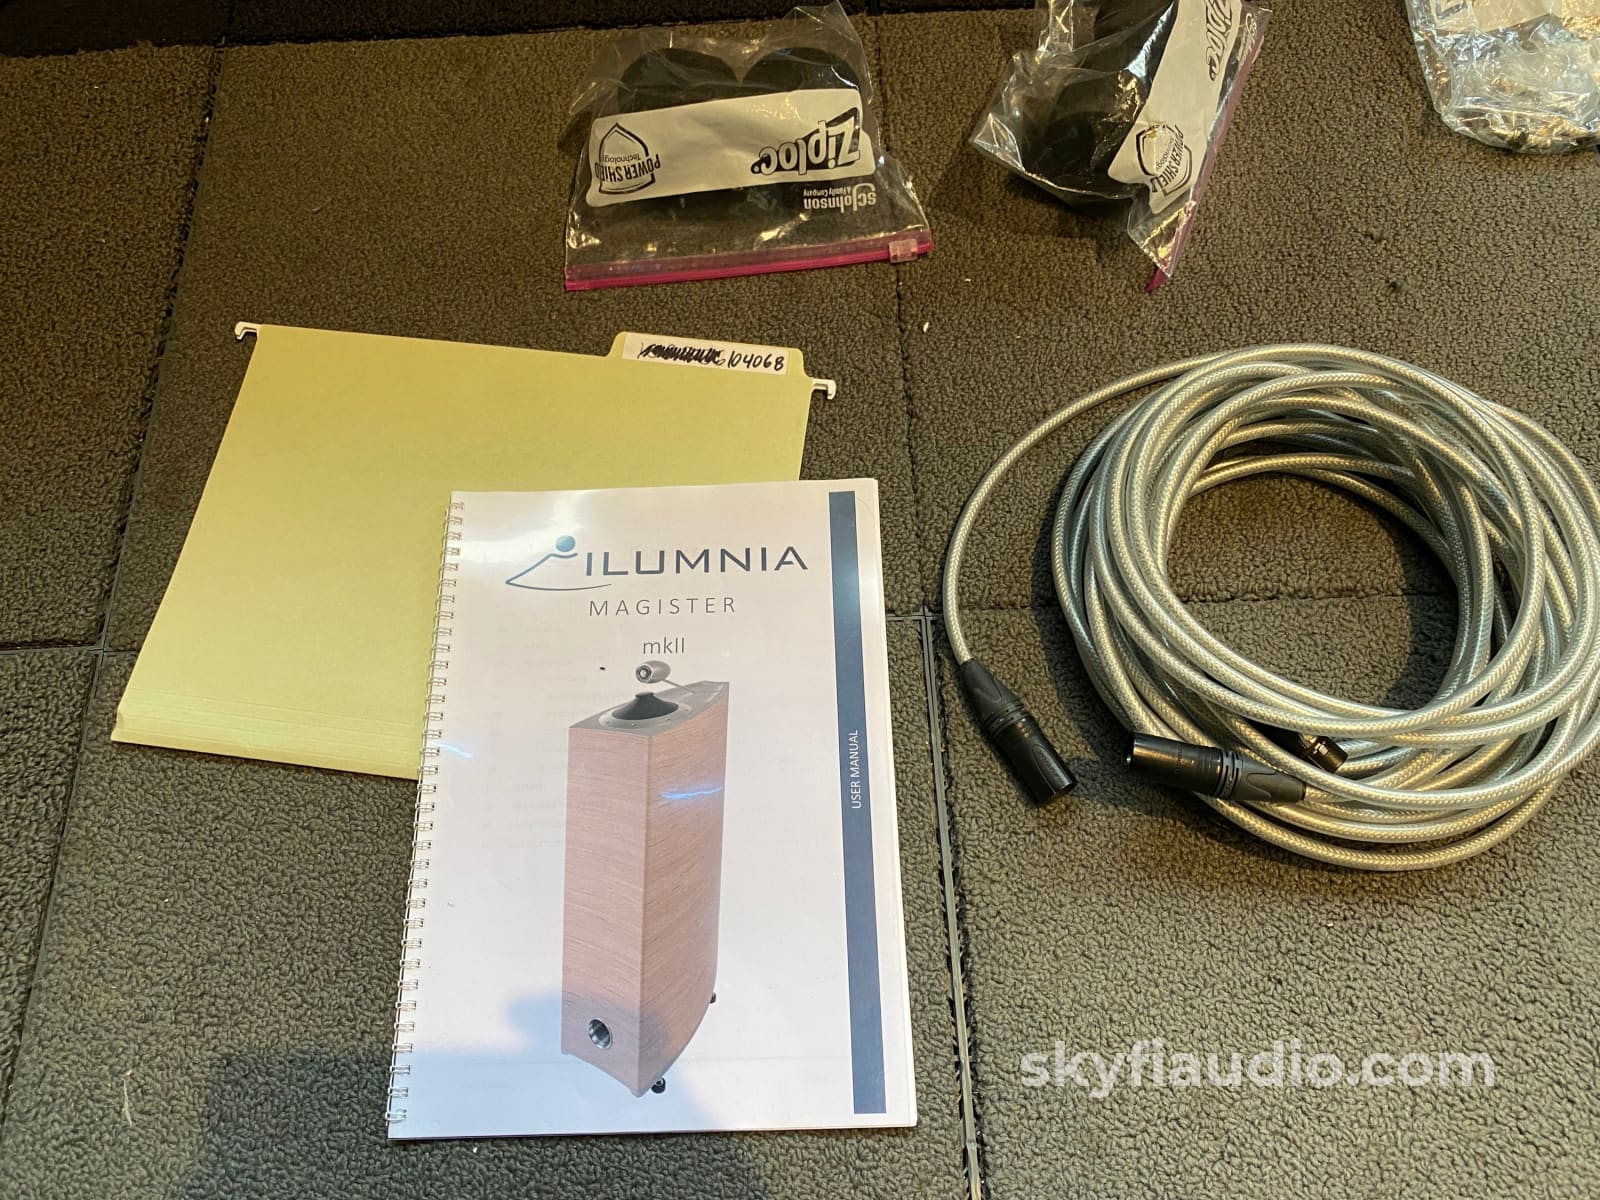 Ilumnia Magister Mkii Field Coil Speakers - Like New And Complete